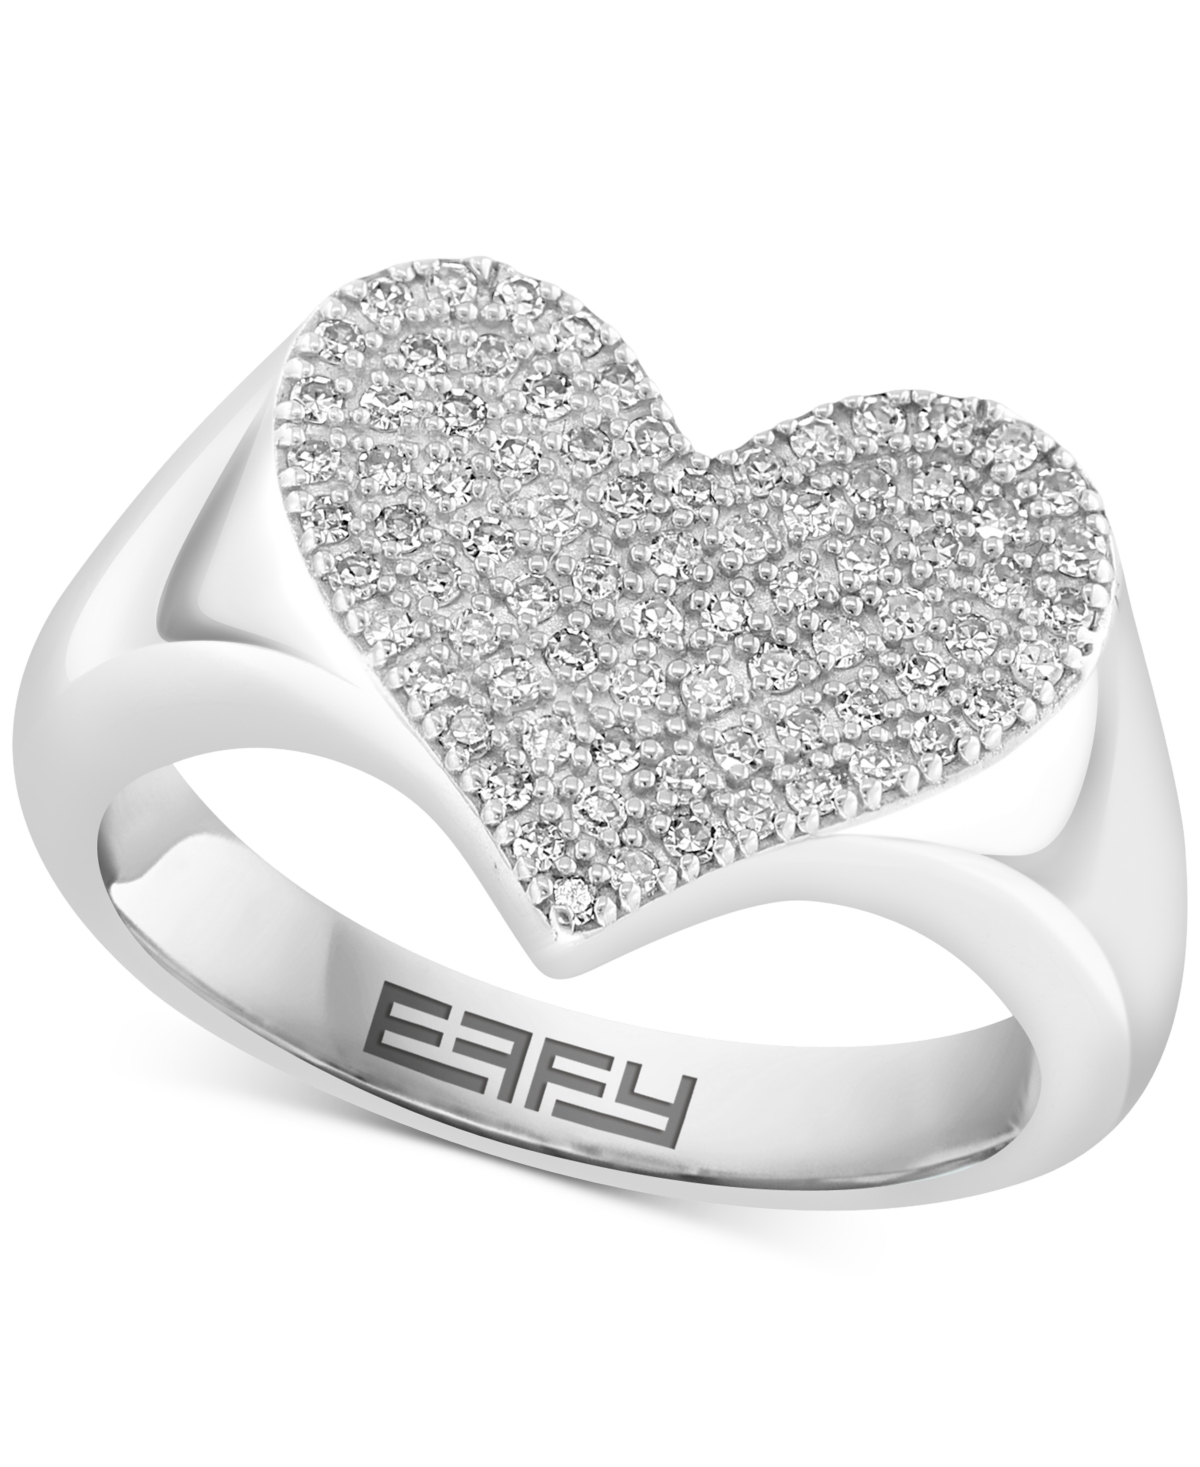 Effy Diamond Pave Heart Ring (1/3 ct. t.w.) in Sterling Silver - Sterling Silver